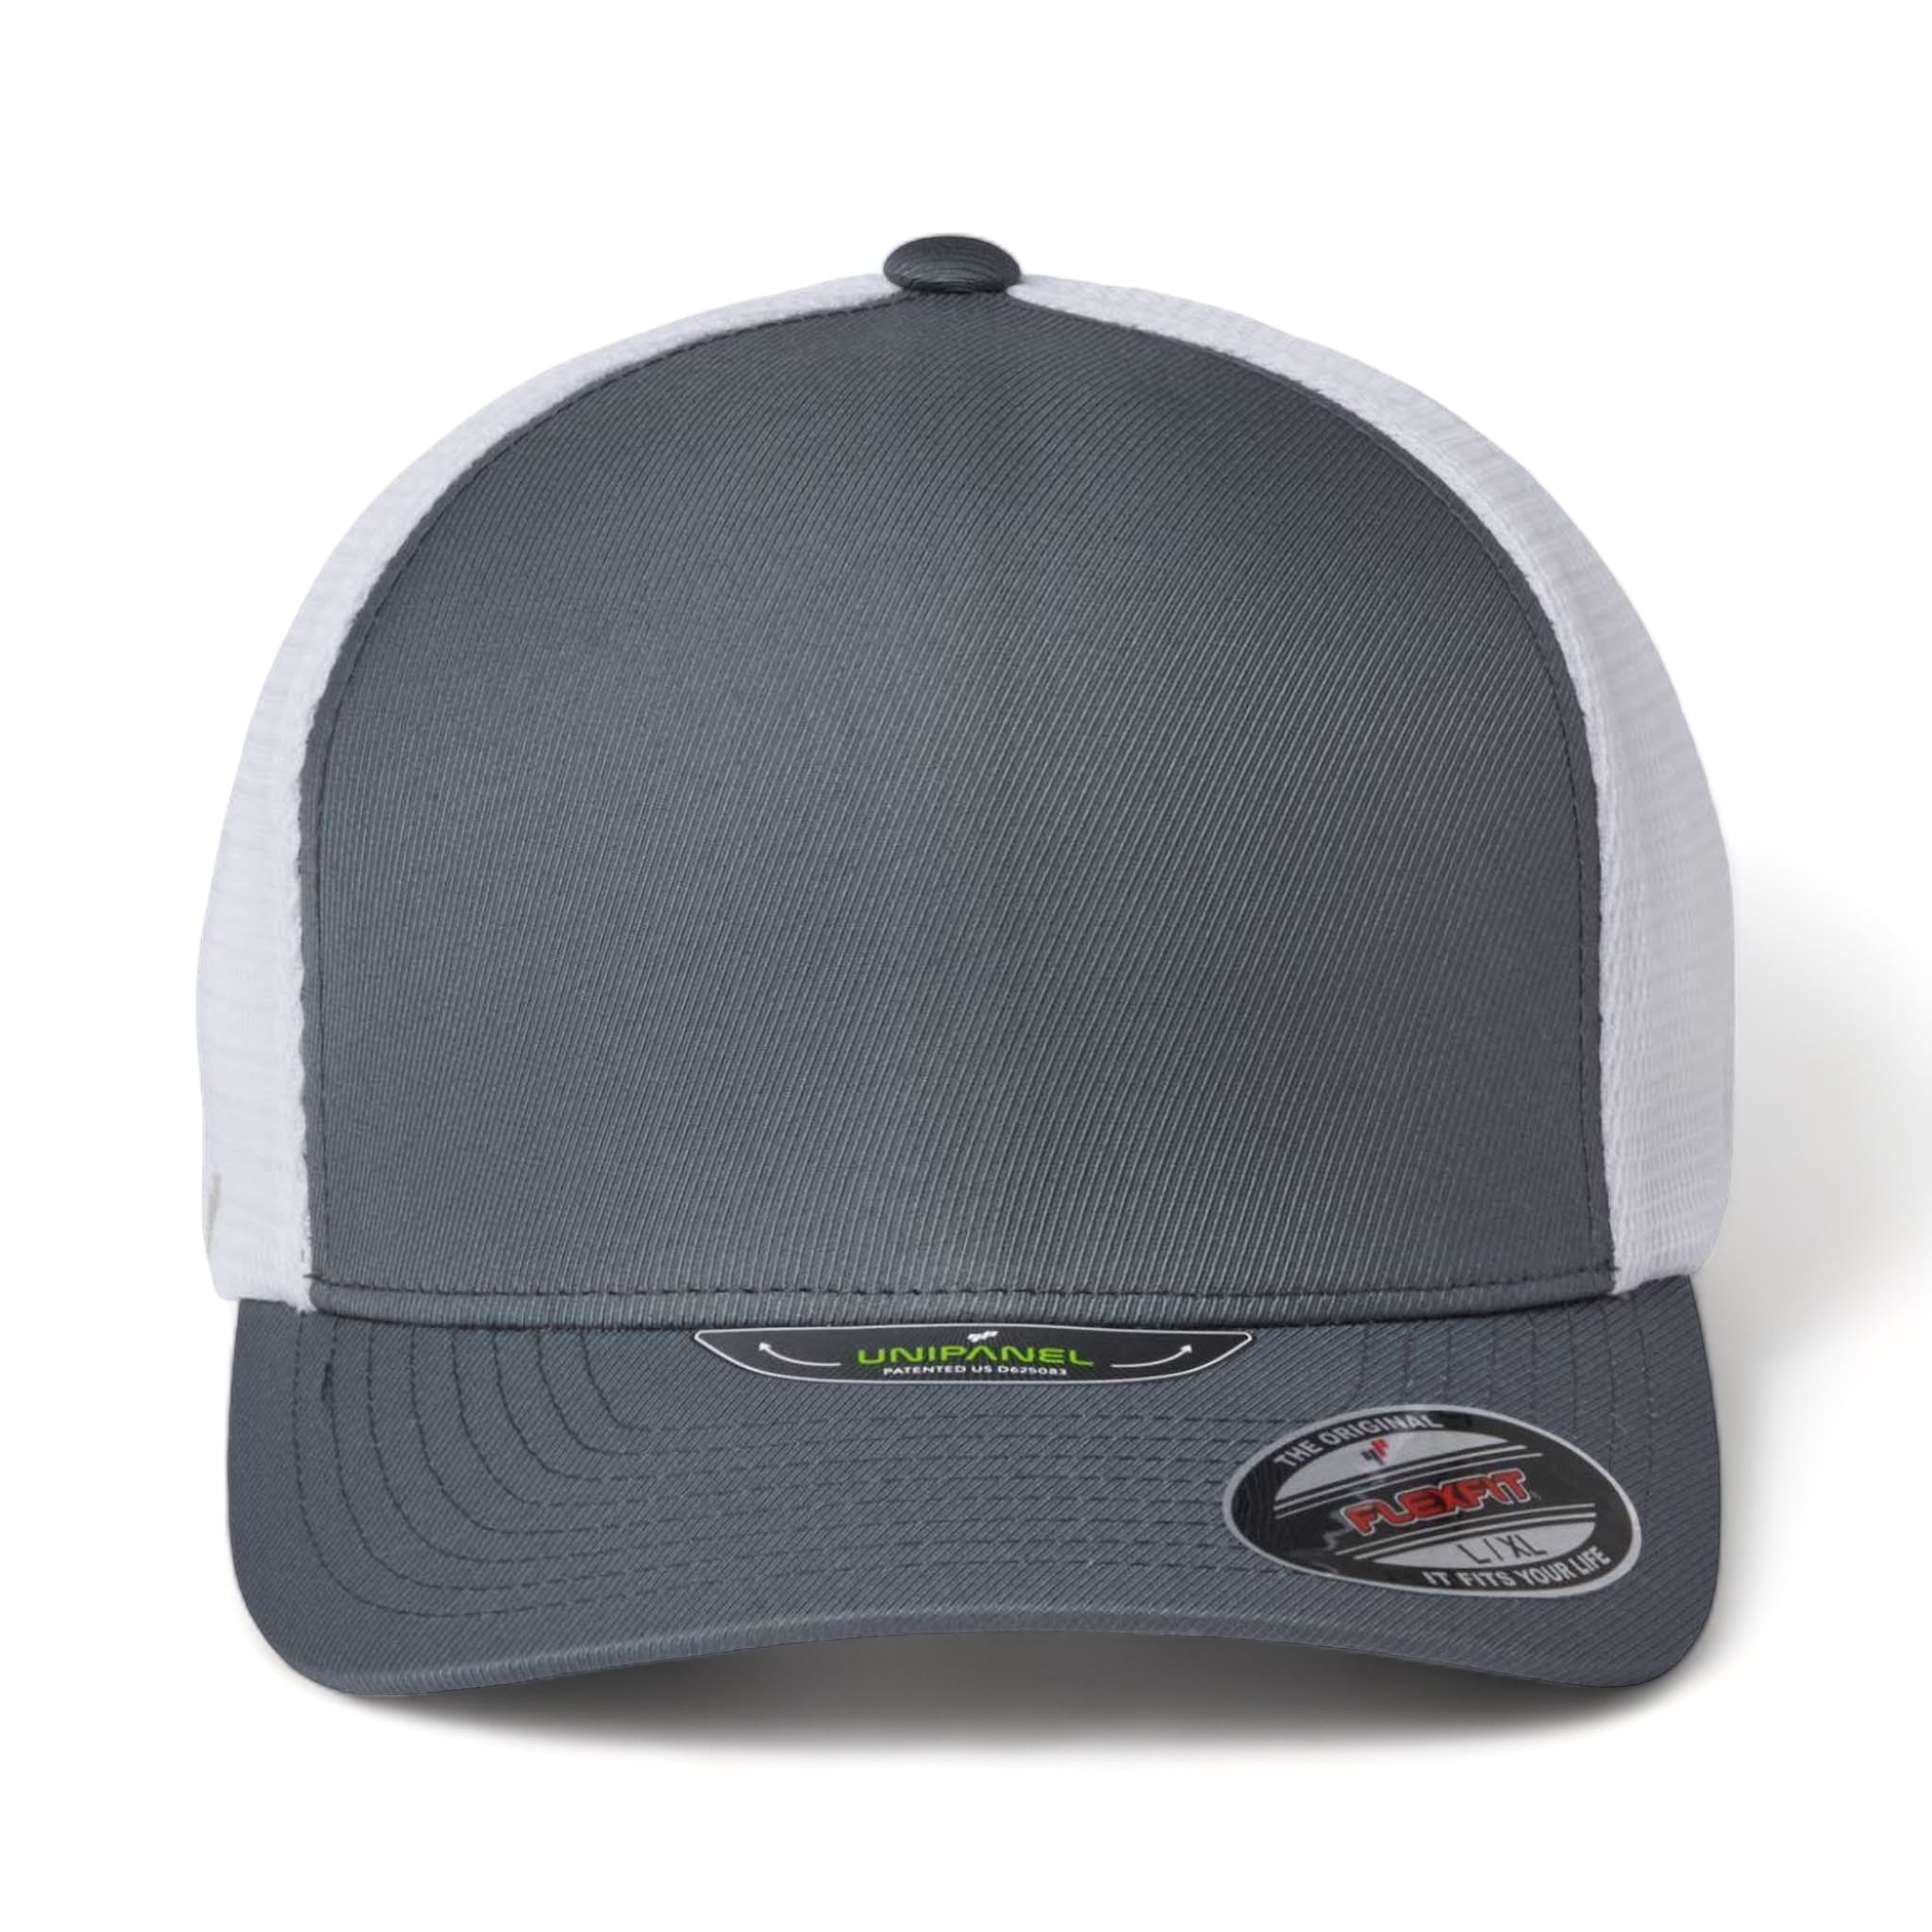 Front view of Flexfit 5511UP custom hat in charcoal and white